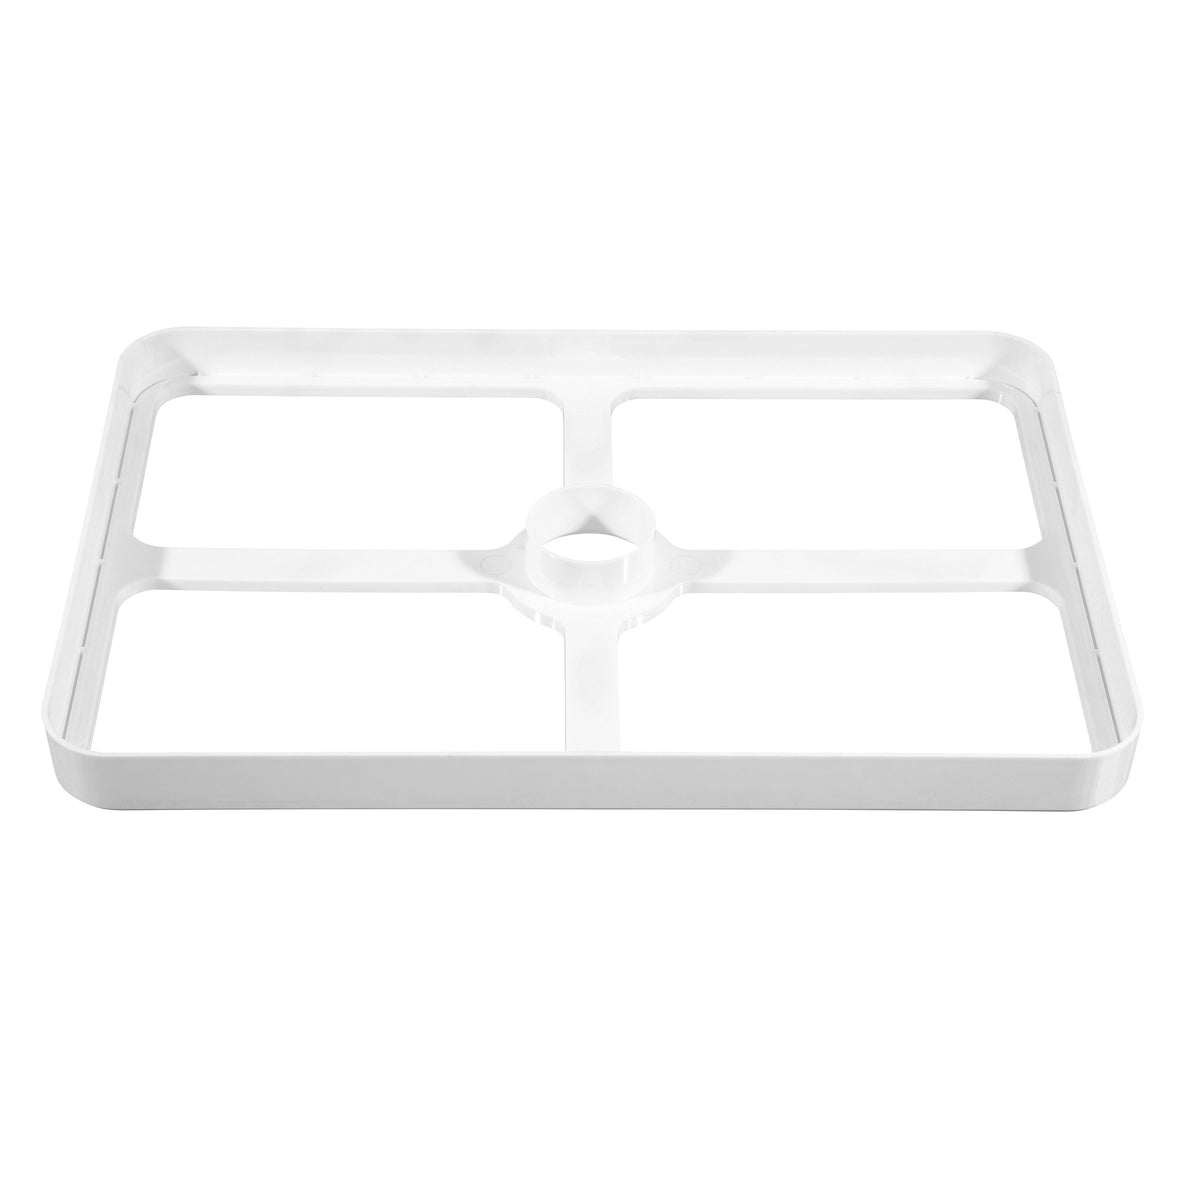 9Pack 14x14 Inch Silicone Dehydrator Sheets Non-Stick Mesh Tray